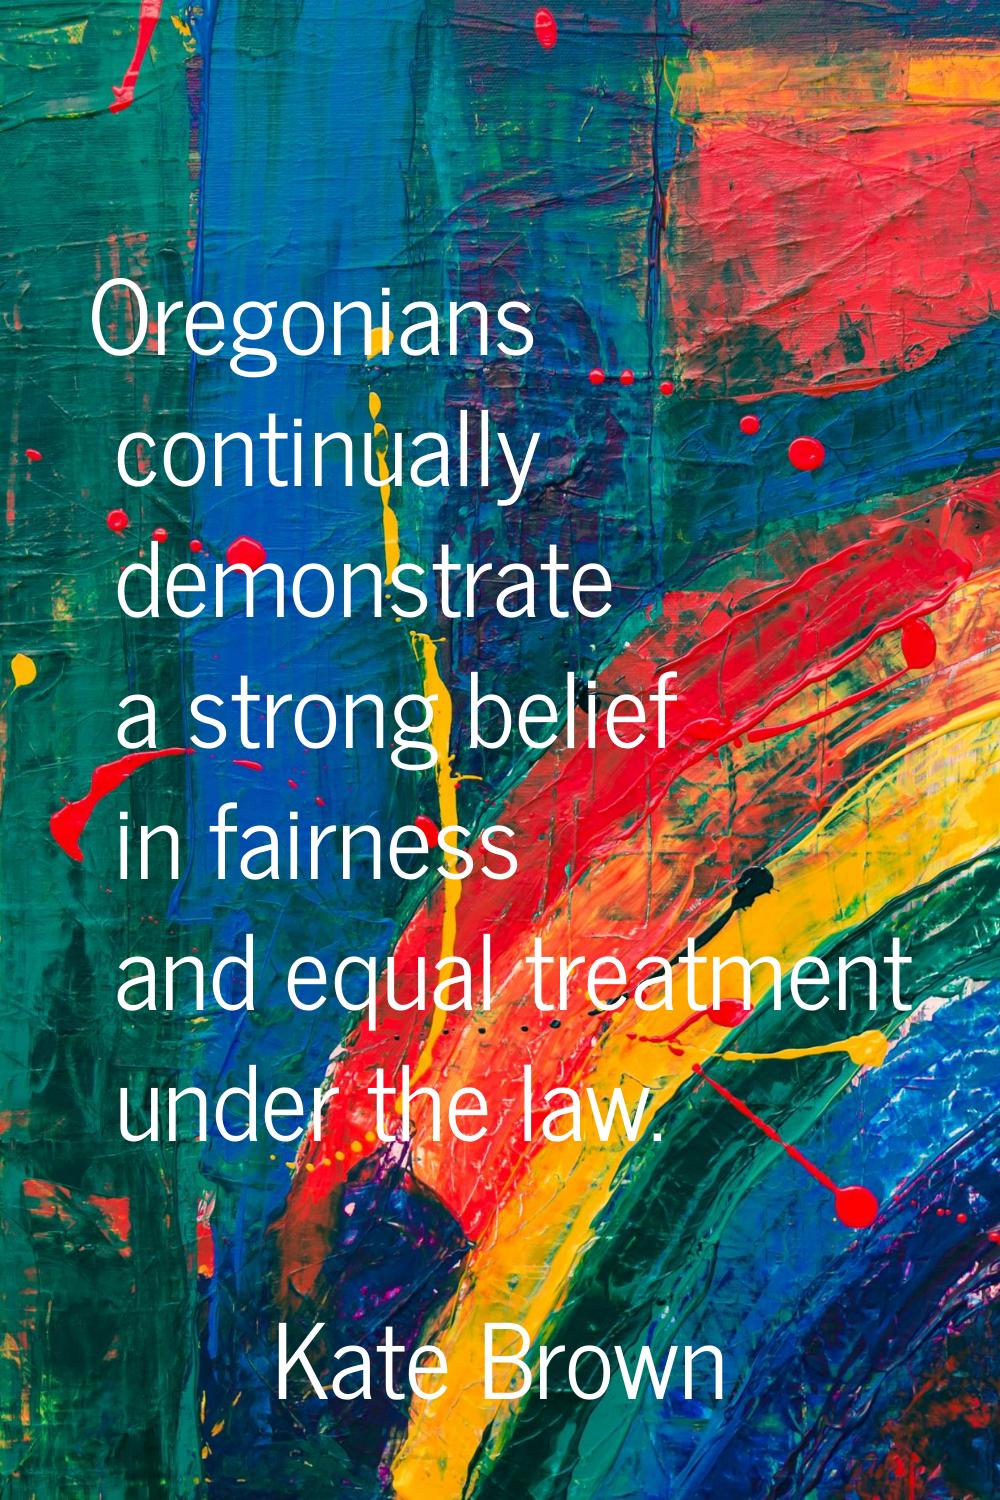 Oregonians continually demonstrate a strong belief in fairness and equal treatment under the law.